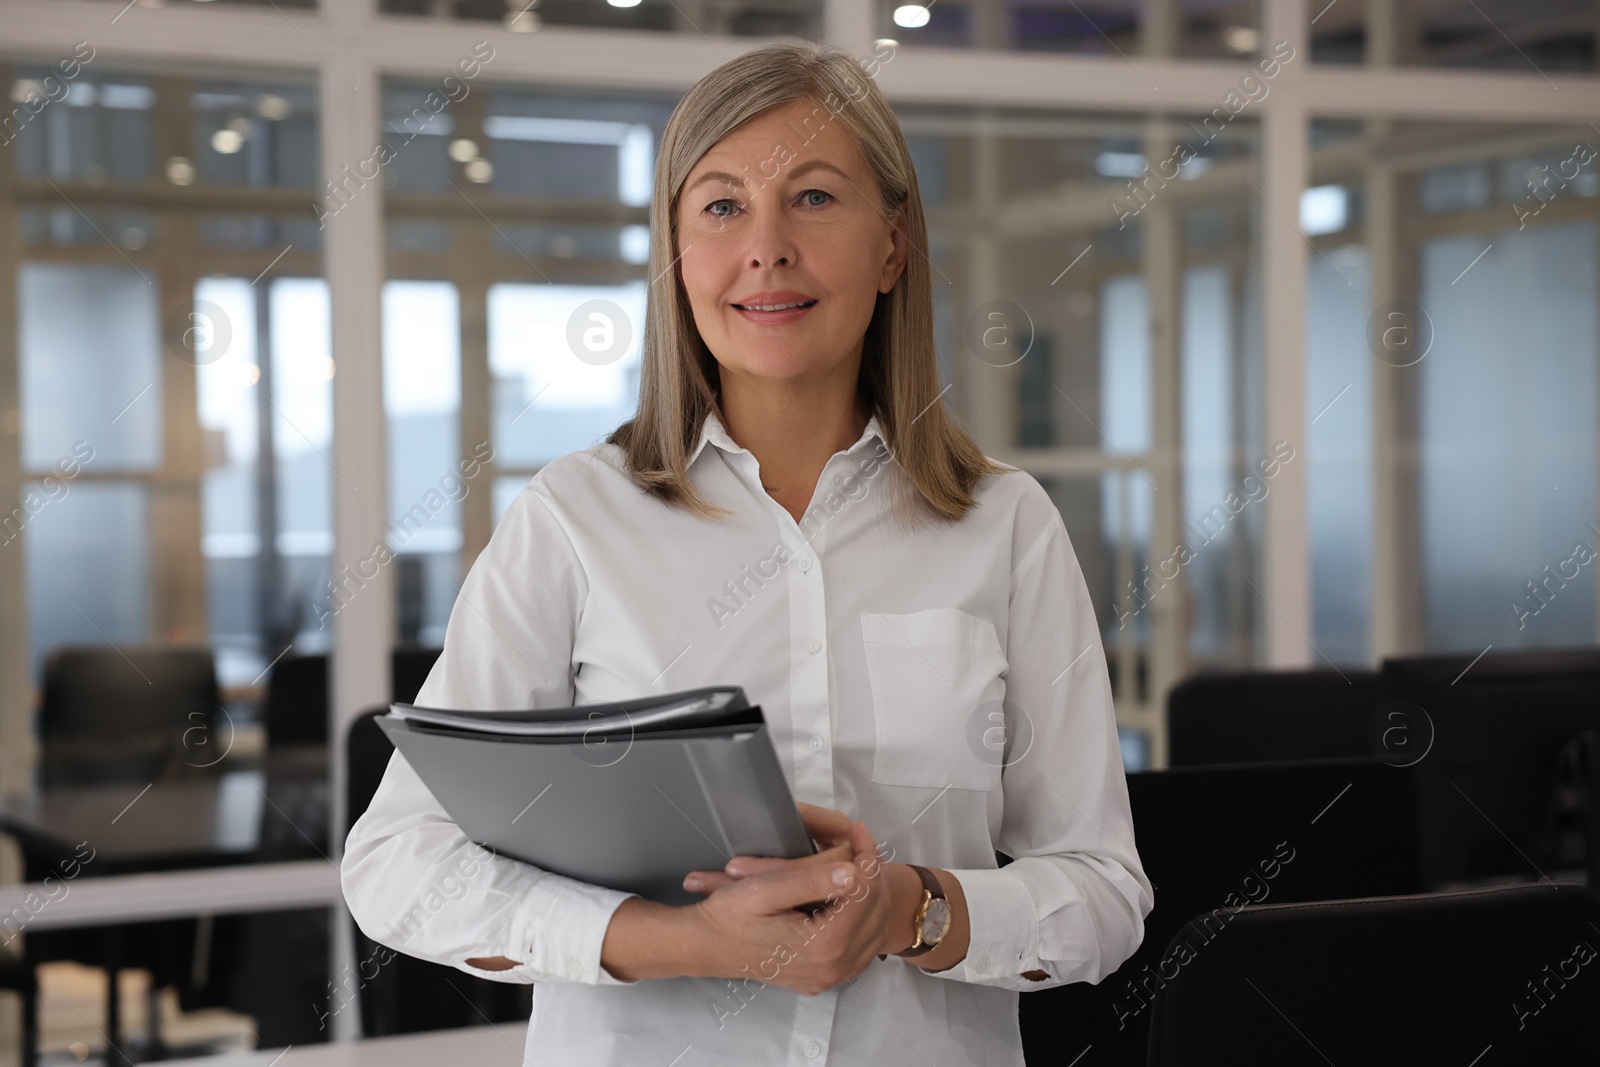 Photo of Smiling woman with folders in office. Lawyer, businesswoman, accountant or manager